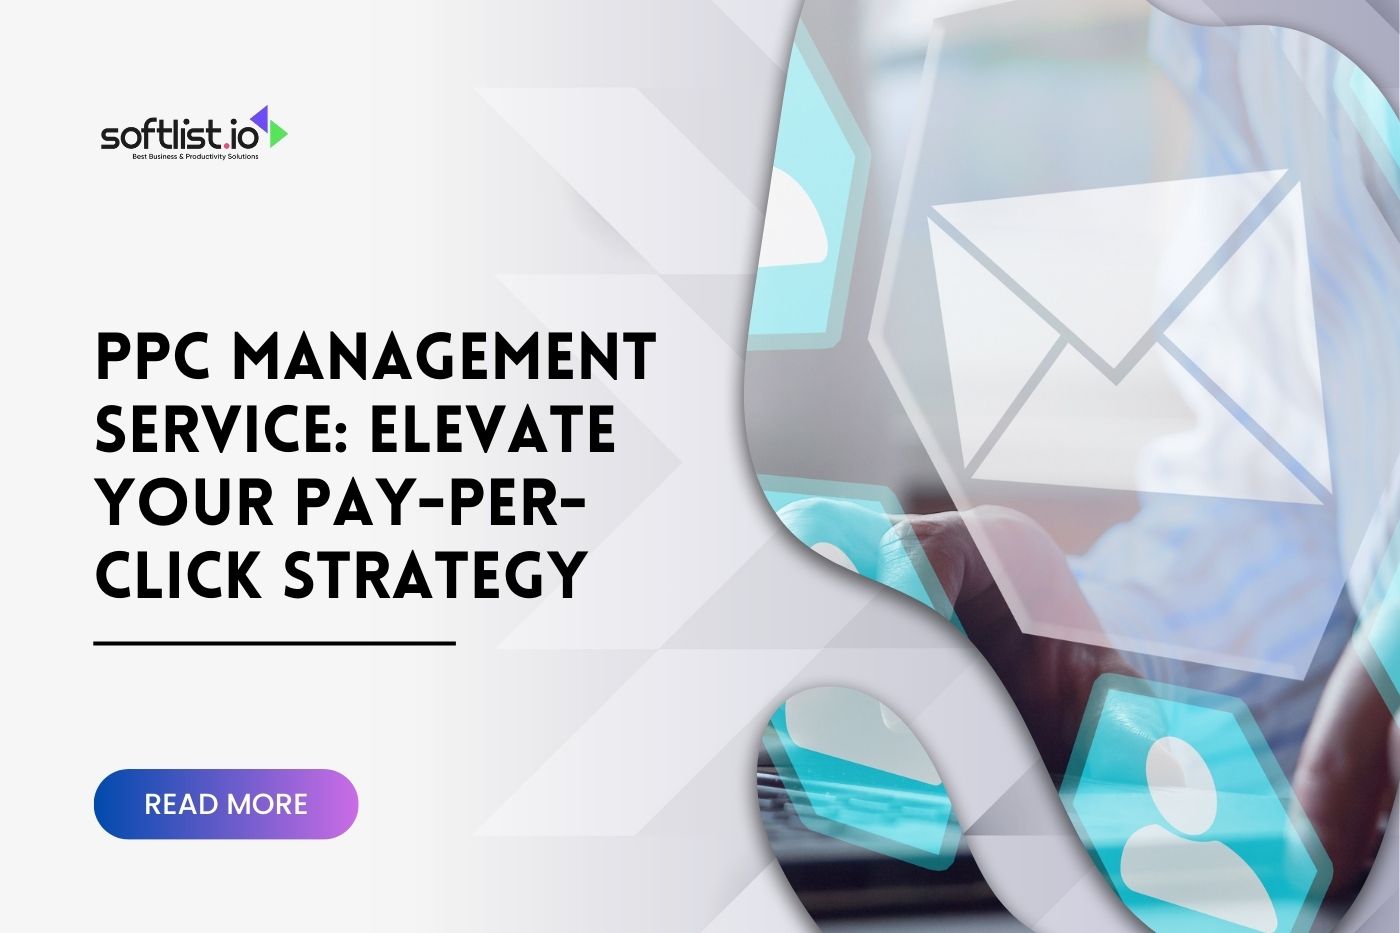 PPC Management Service: Elevate Your Pay-Per-Click Strategy